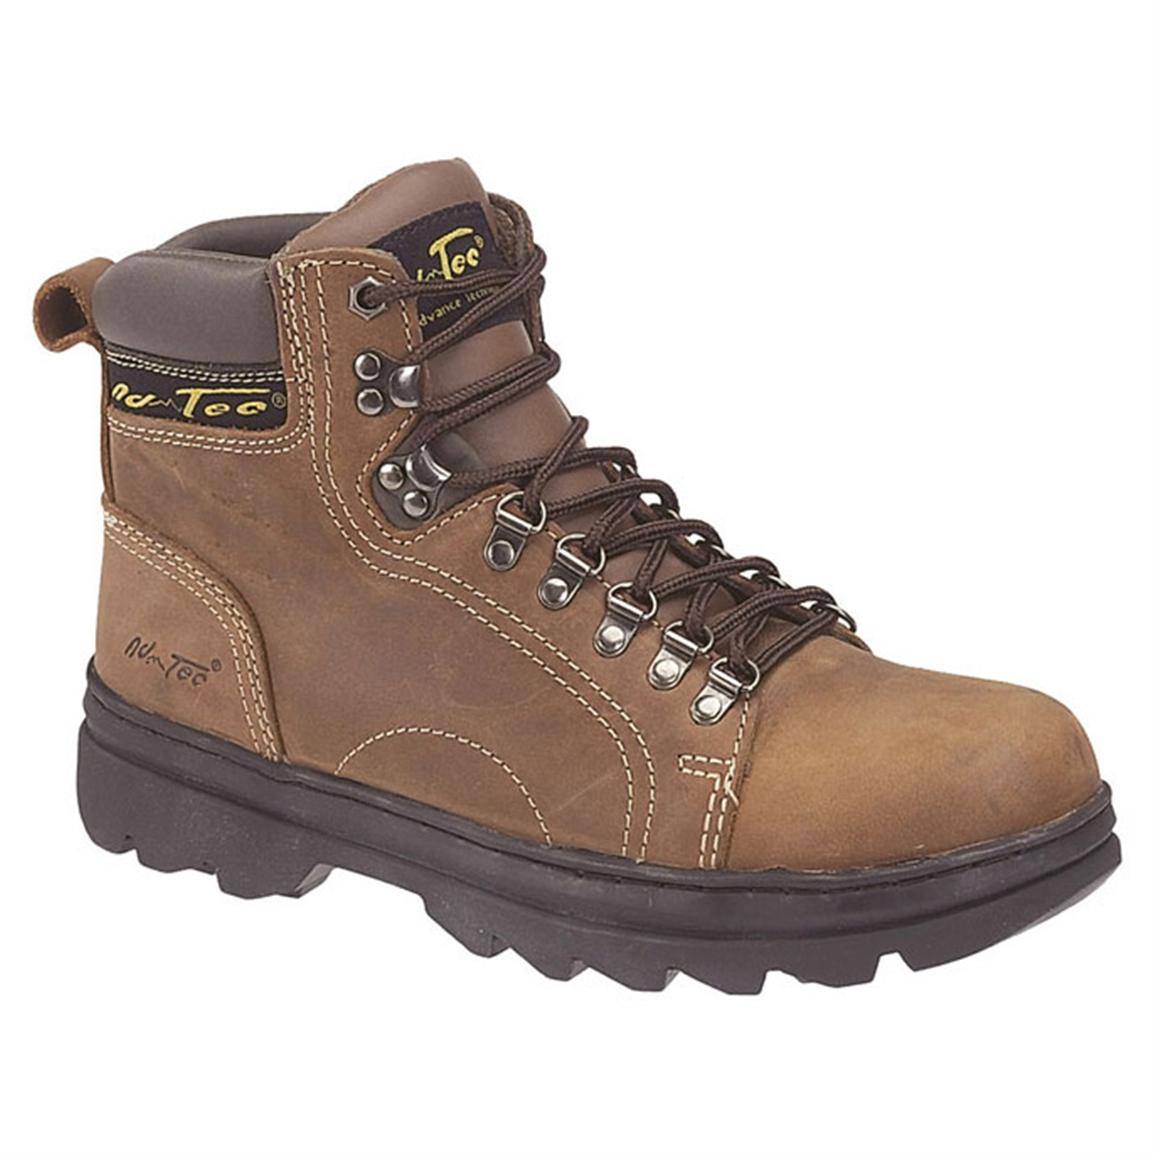 men's 6 inch hiking boots